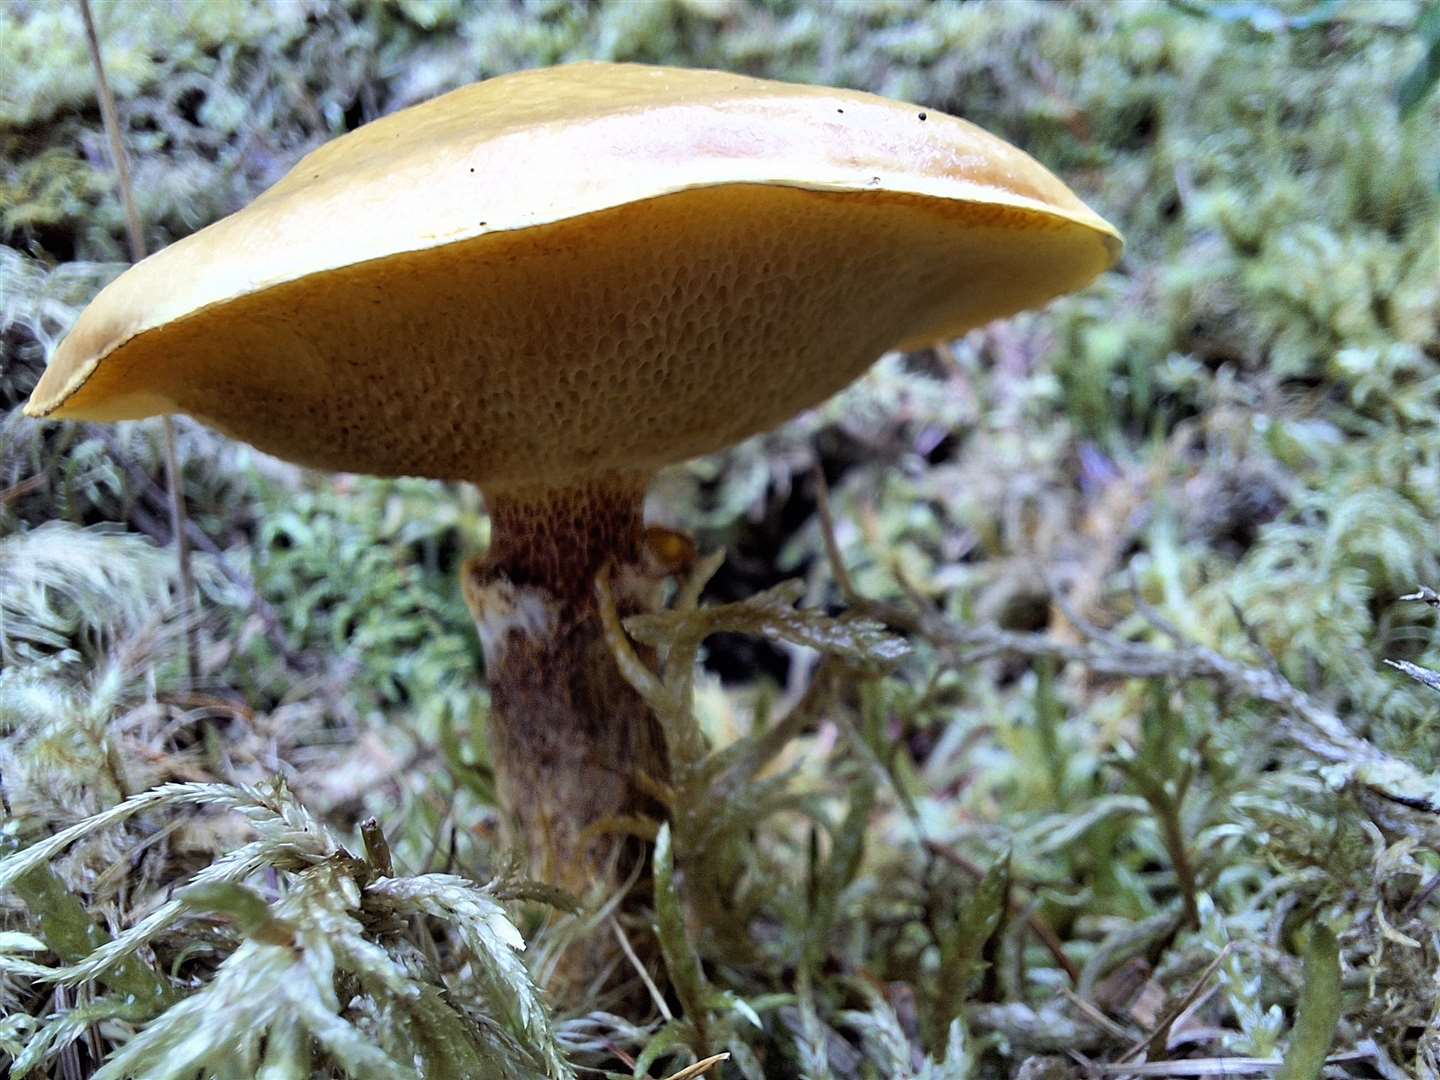 One of the many examples of fungi in the forest.